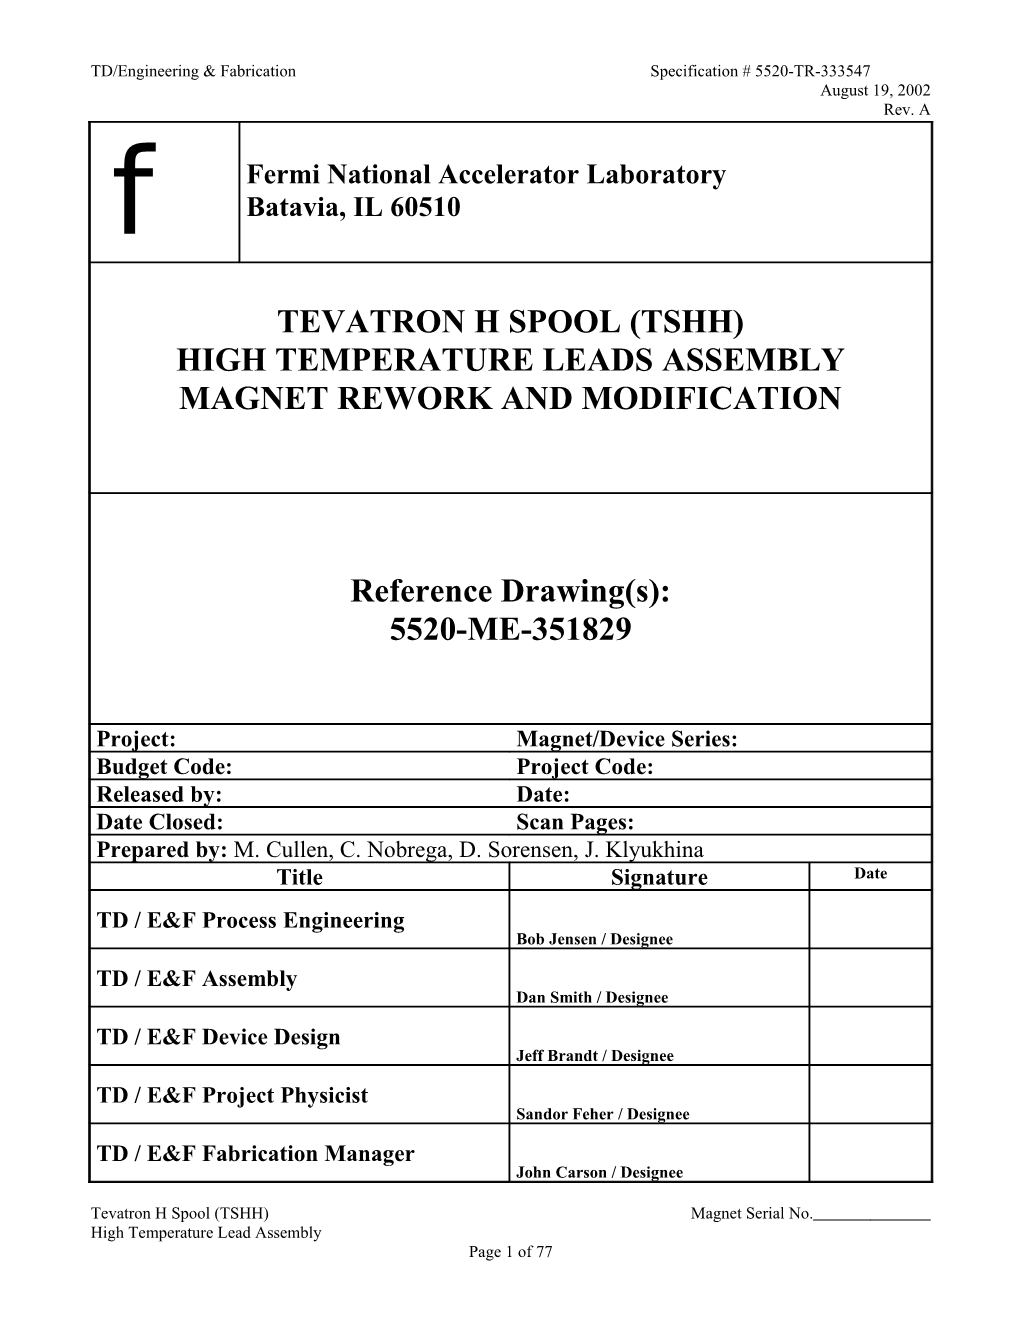 TD/Engineering & Fabrication Specification # 5520-TR-333547